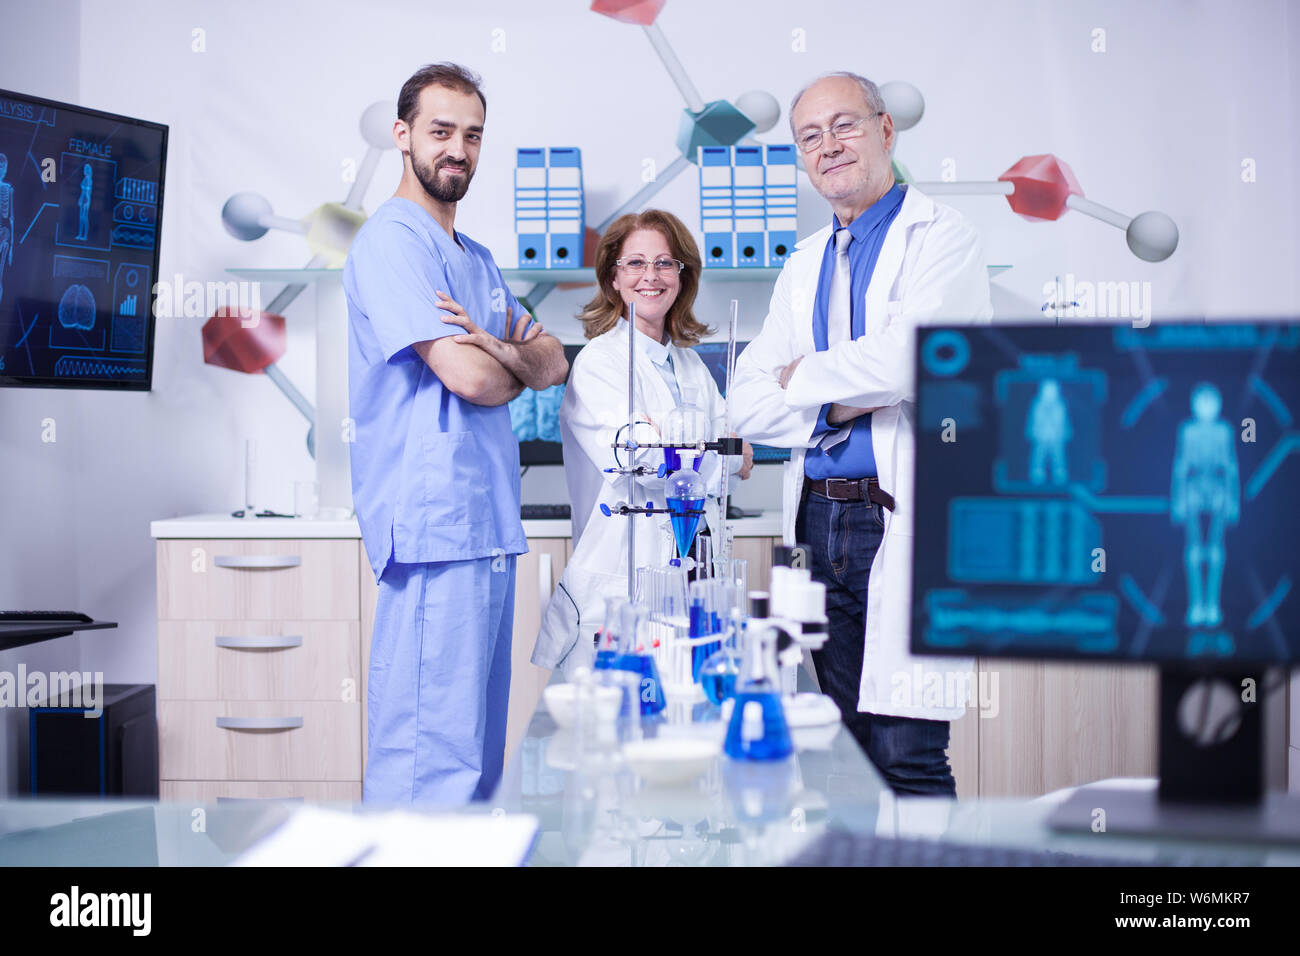 Smiling scientist colleagues in their uniform standing in chimical lab. Laboratory equipment. Stock Photo